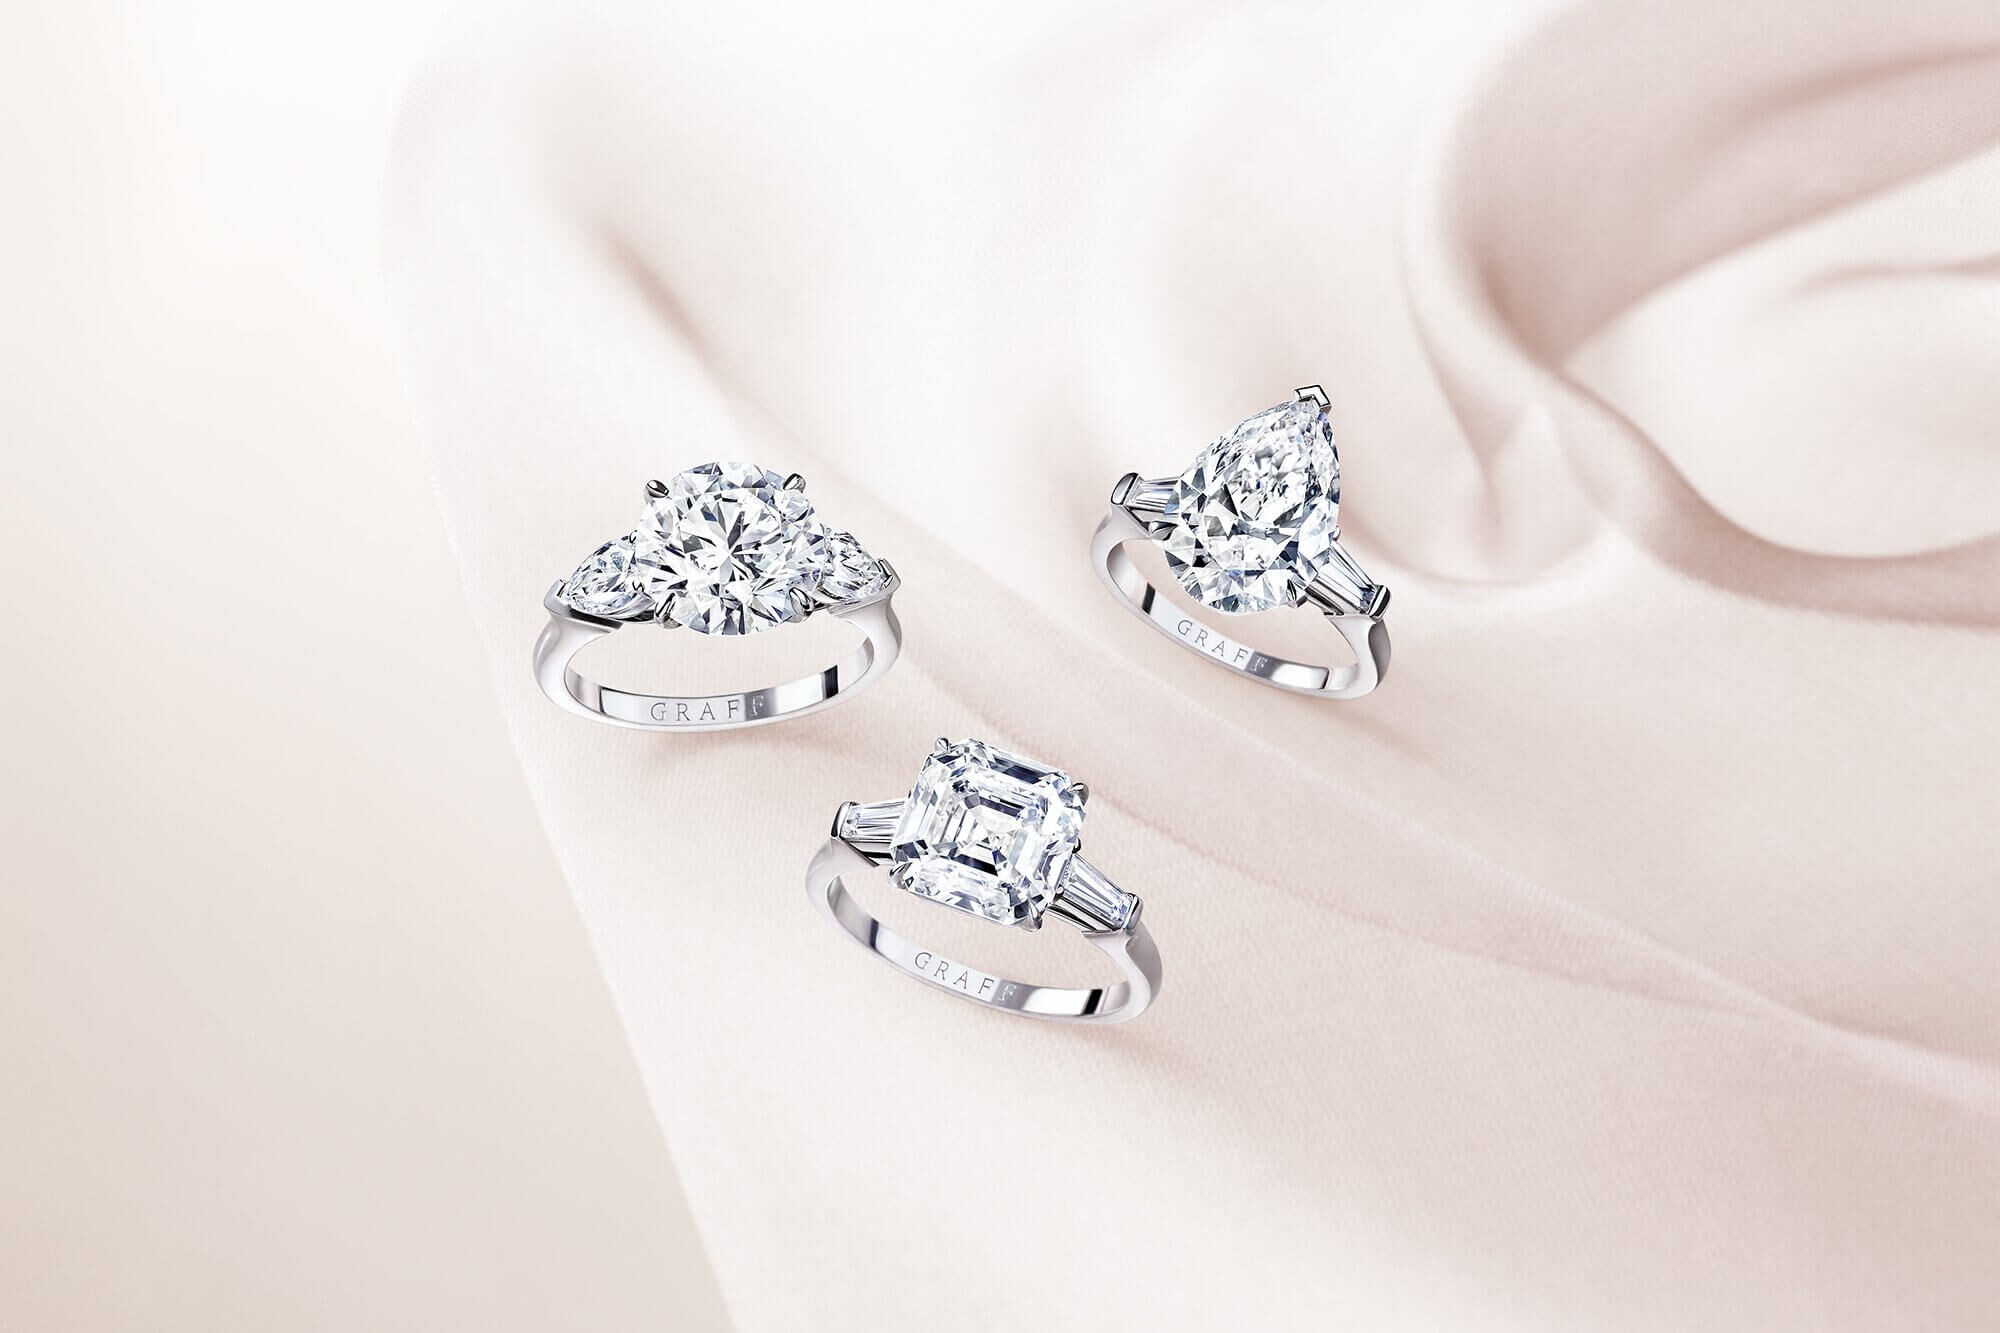 Three promise diamond engagement rings by Graff on a silk fabric